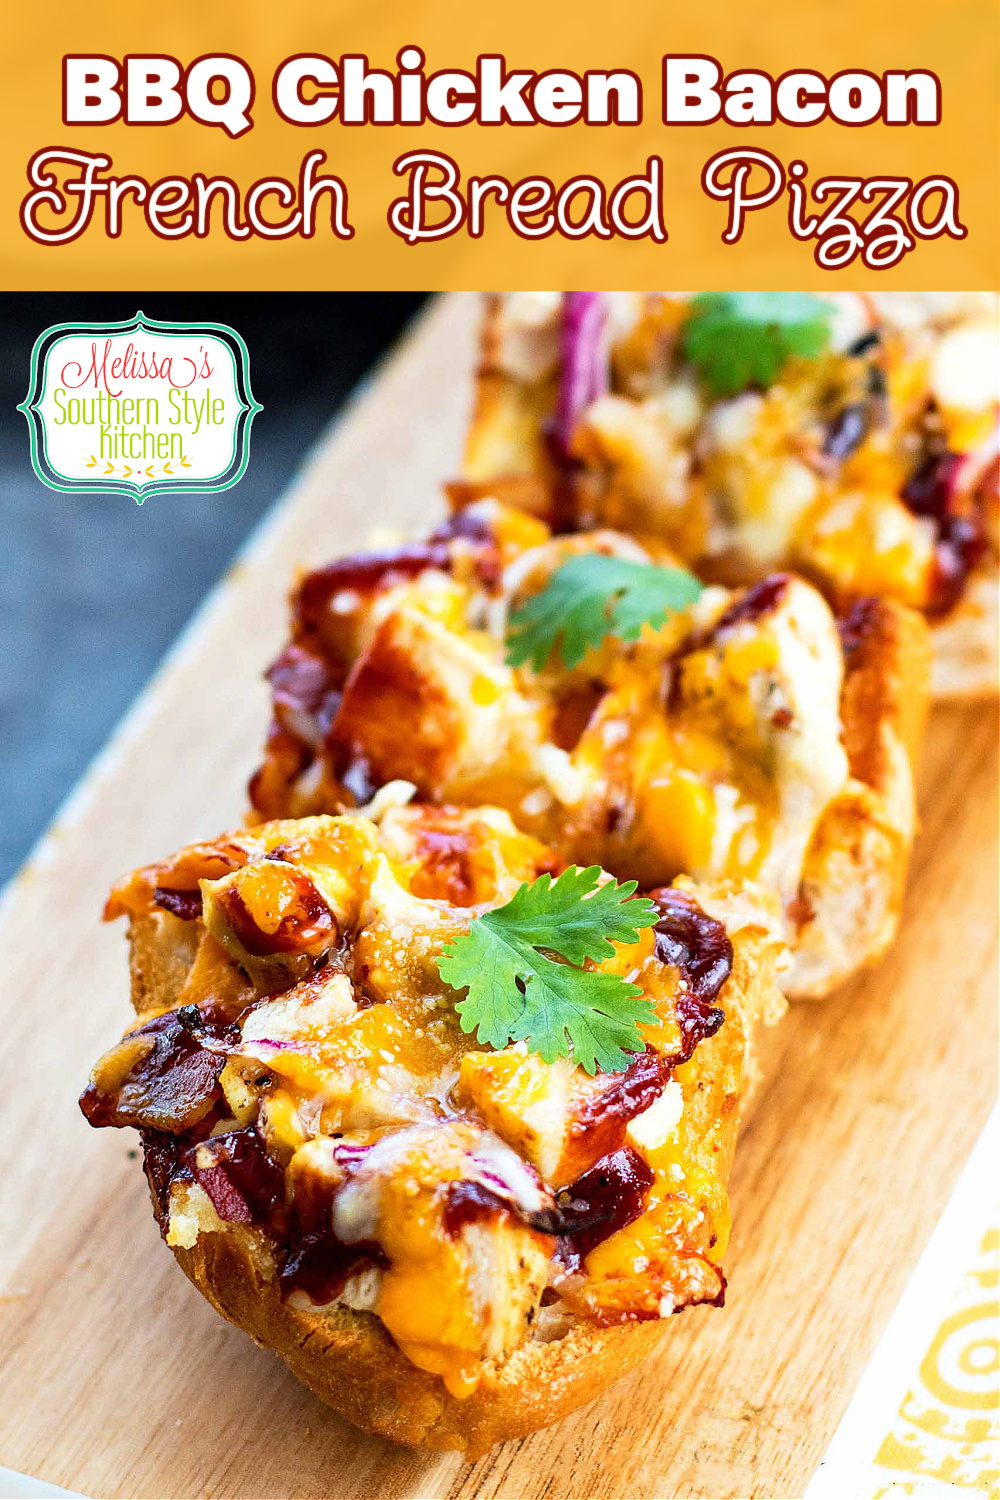 Barbecue Chicken and Bacon French Bread is a 20 minute meal that won't break the bank #barbecuechicken #frenchbreadpizza #frenhcbread #bbq #bbqchicken #bacon #easyrecipes #dinner #dinnerideas #easychickenrecipes #southernfood #southernrecipes